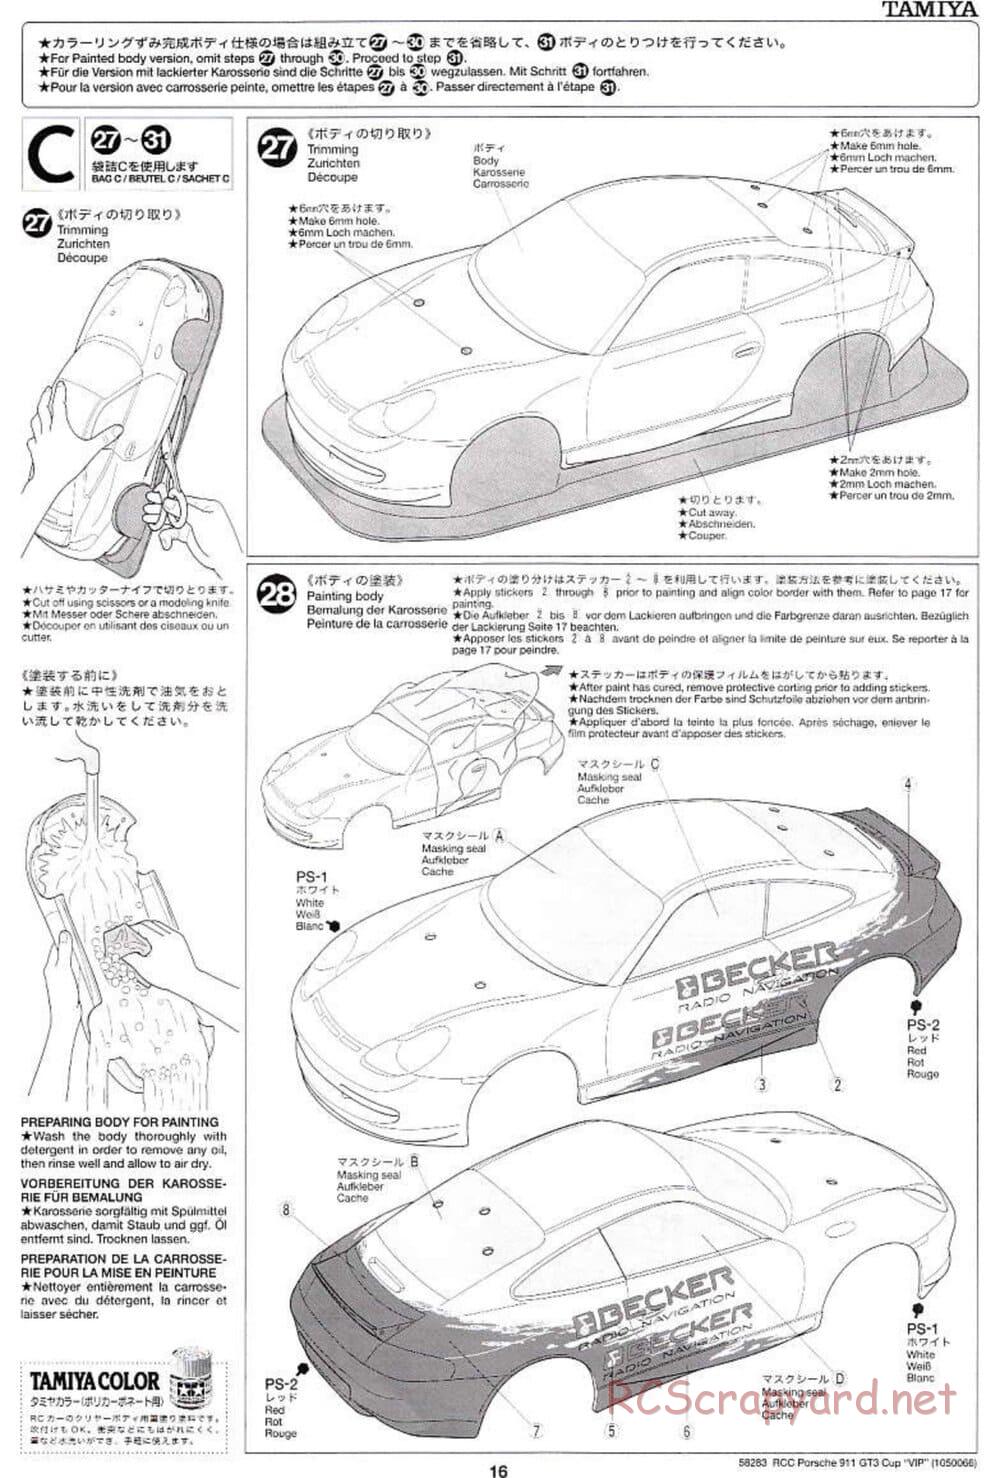 Tamiya - Porsche 911 GT3 Cup VIP - TL-01 Chassis - Manual - Page 16